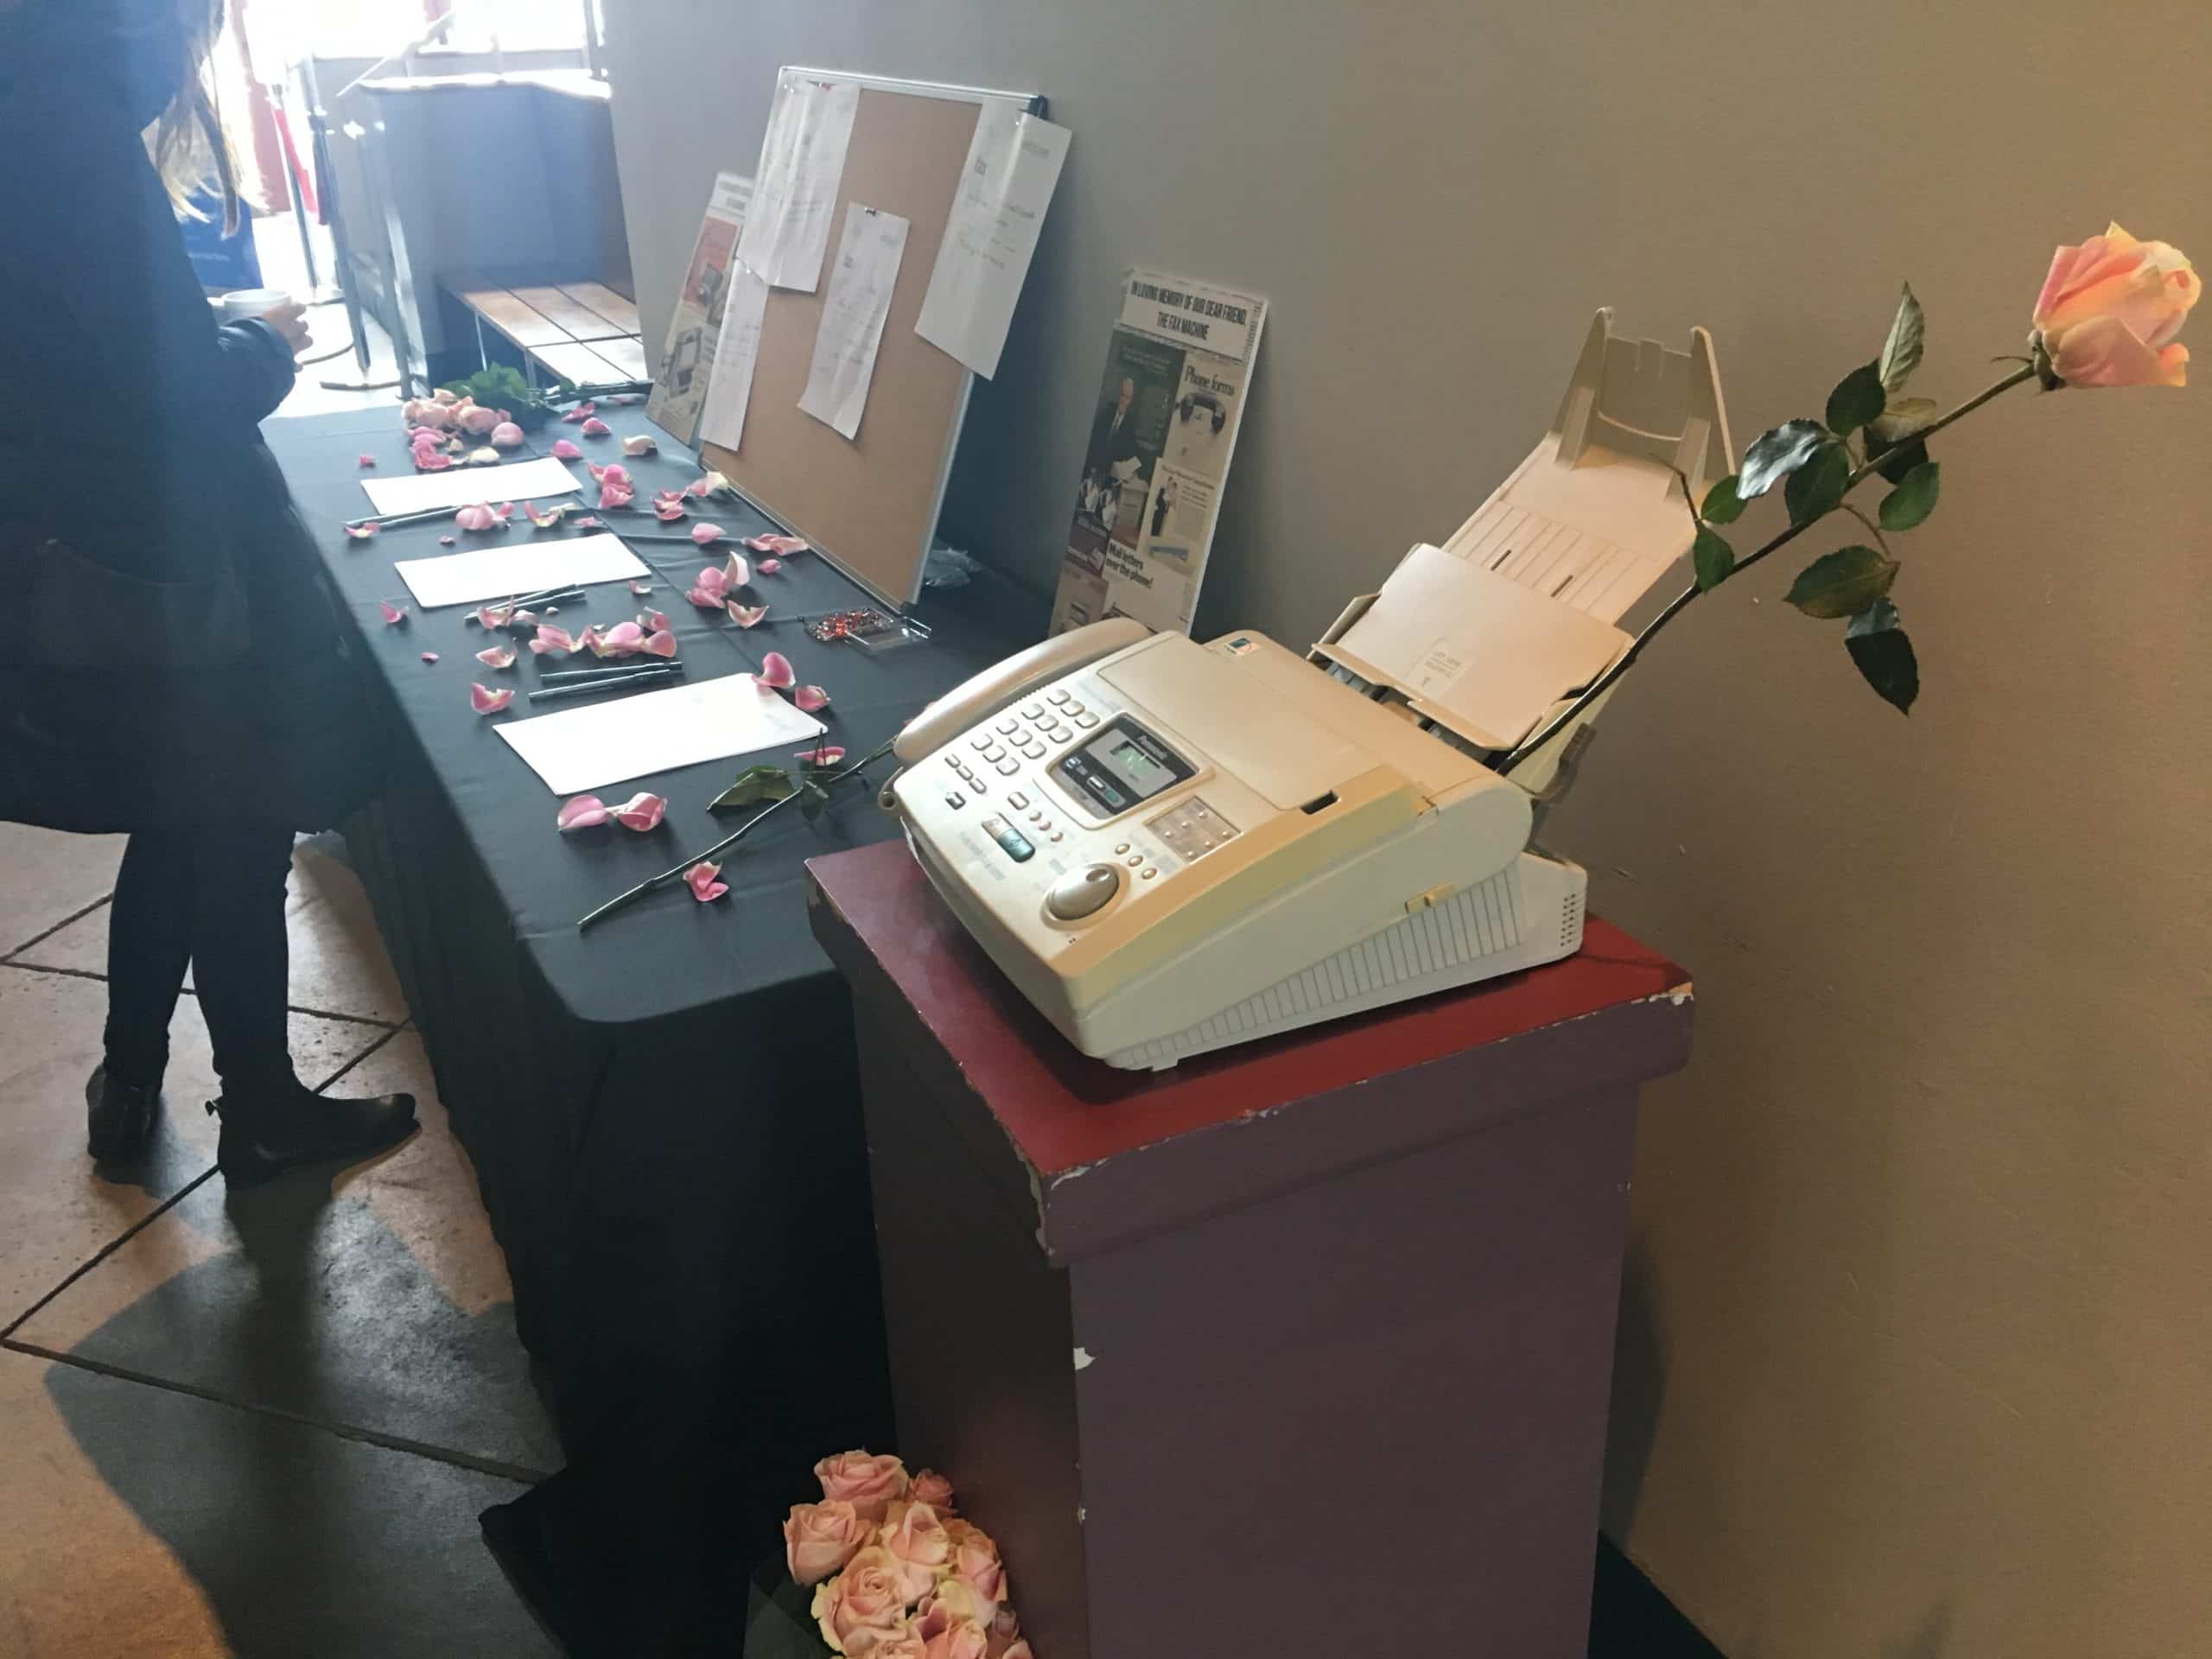 Rememberance Board - A Wake for the Fax Machine - Paubox SECURE Conference